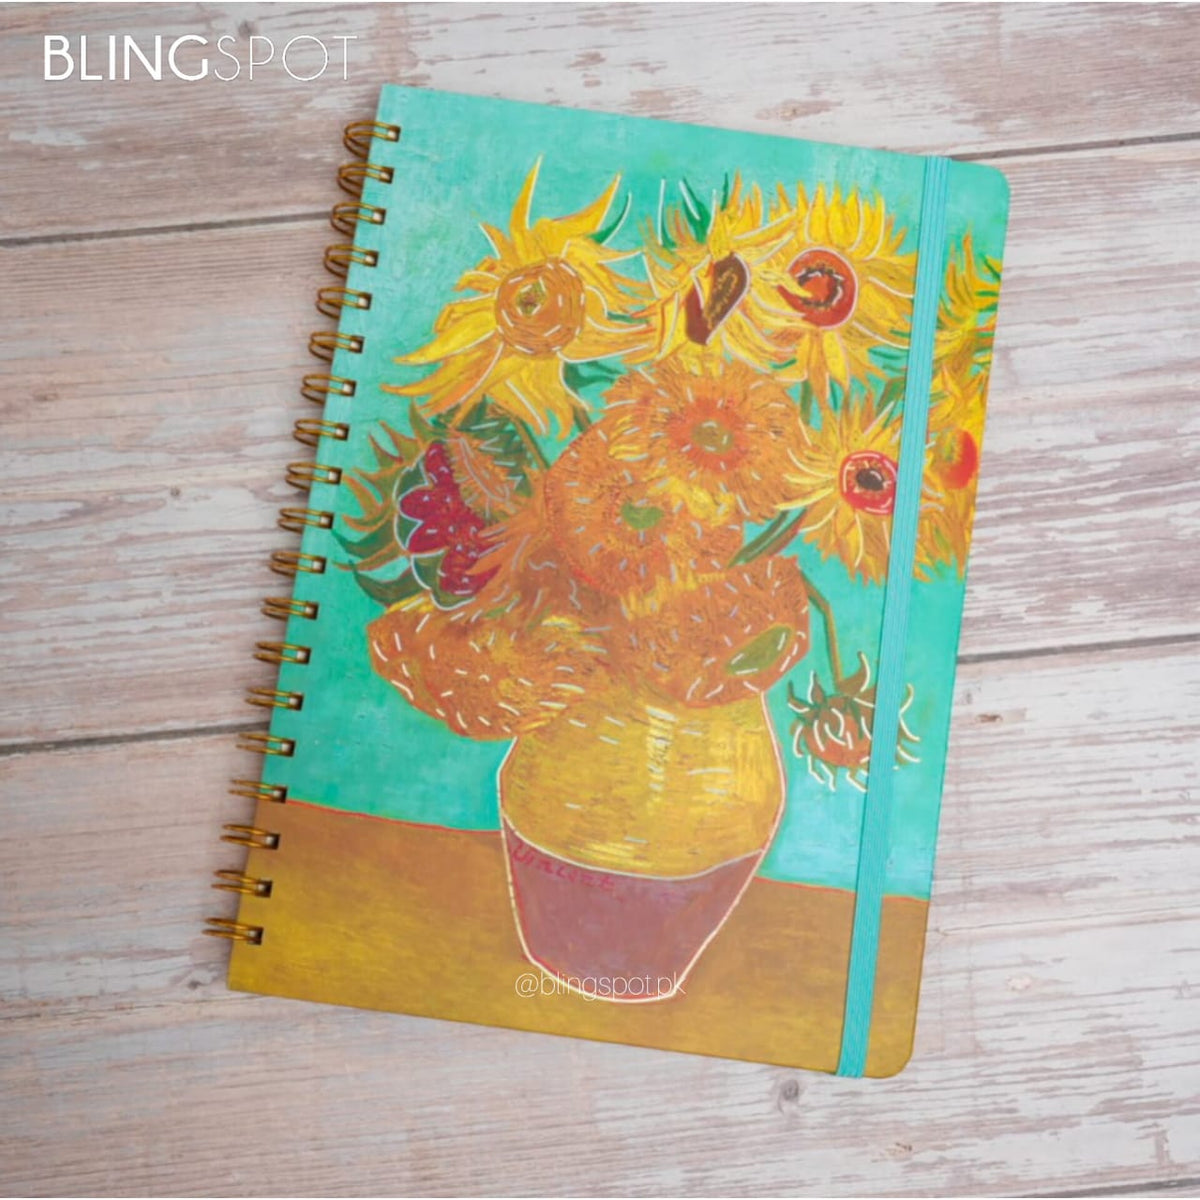 Van-Gogh Self Painting Large Foiled Spiral - Notebook / Journal